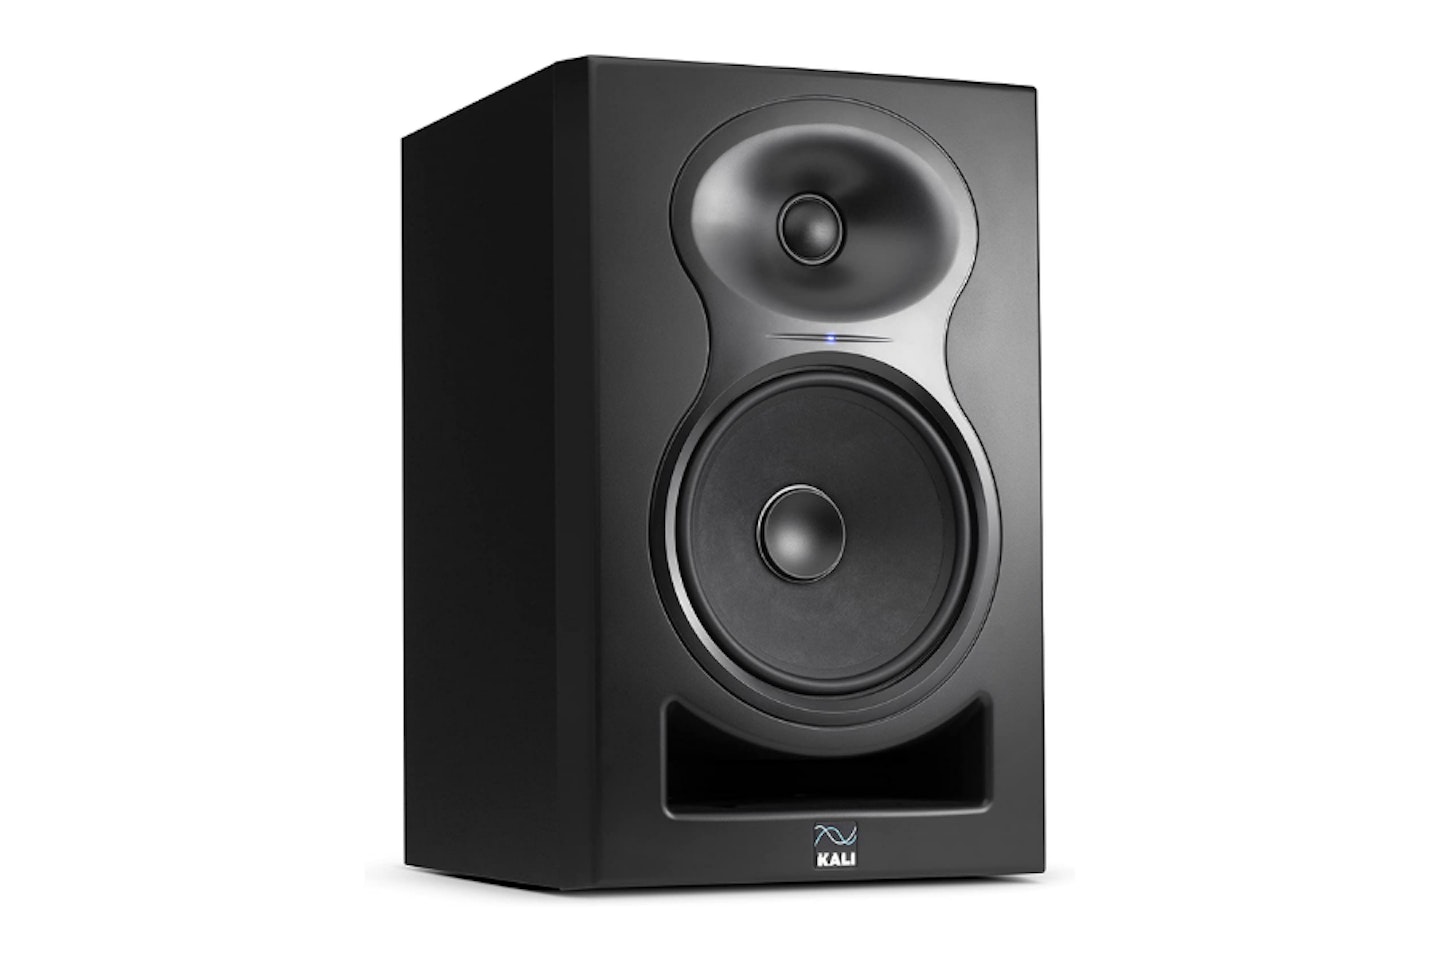 Kali Audio LP-6 - one of the best speakers for music